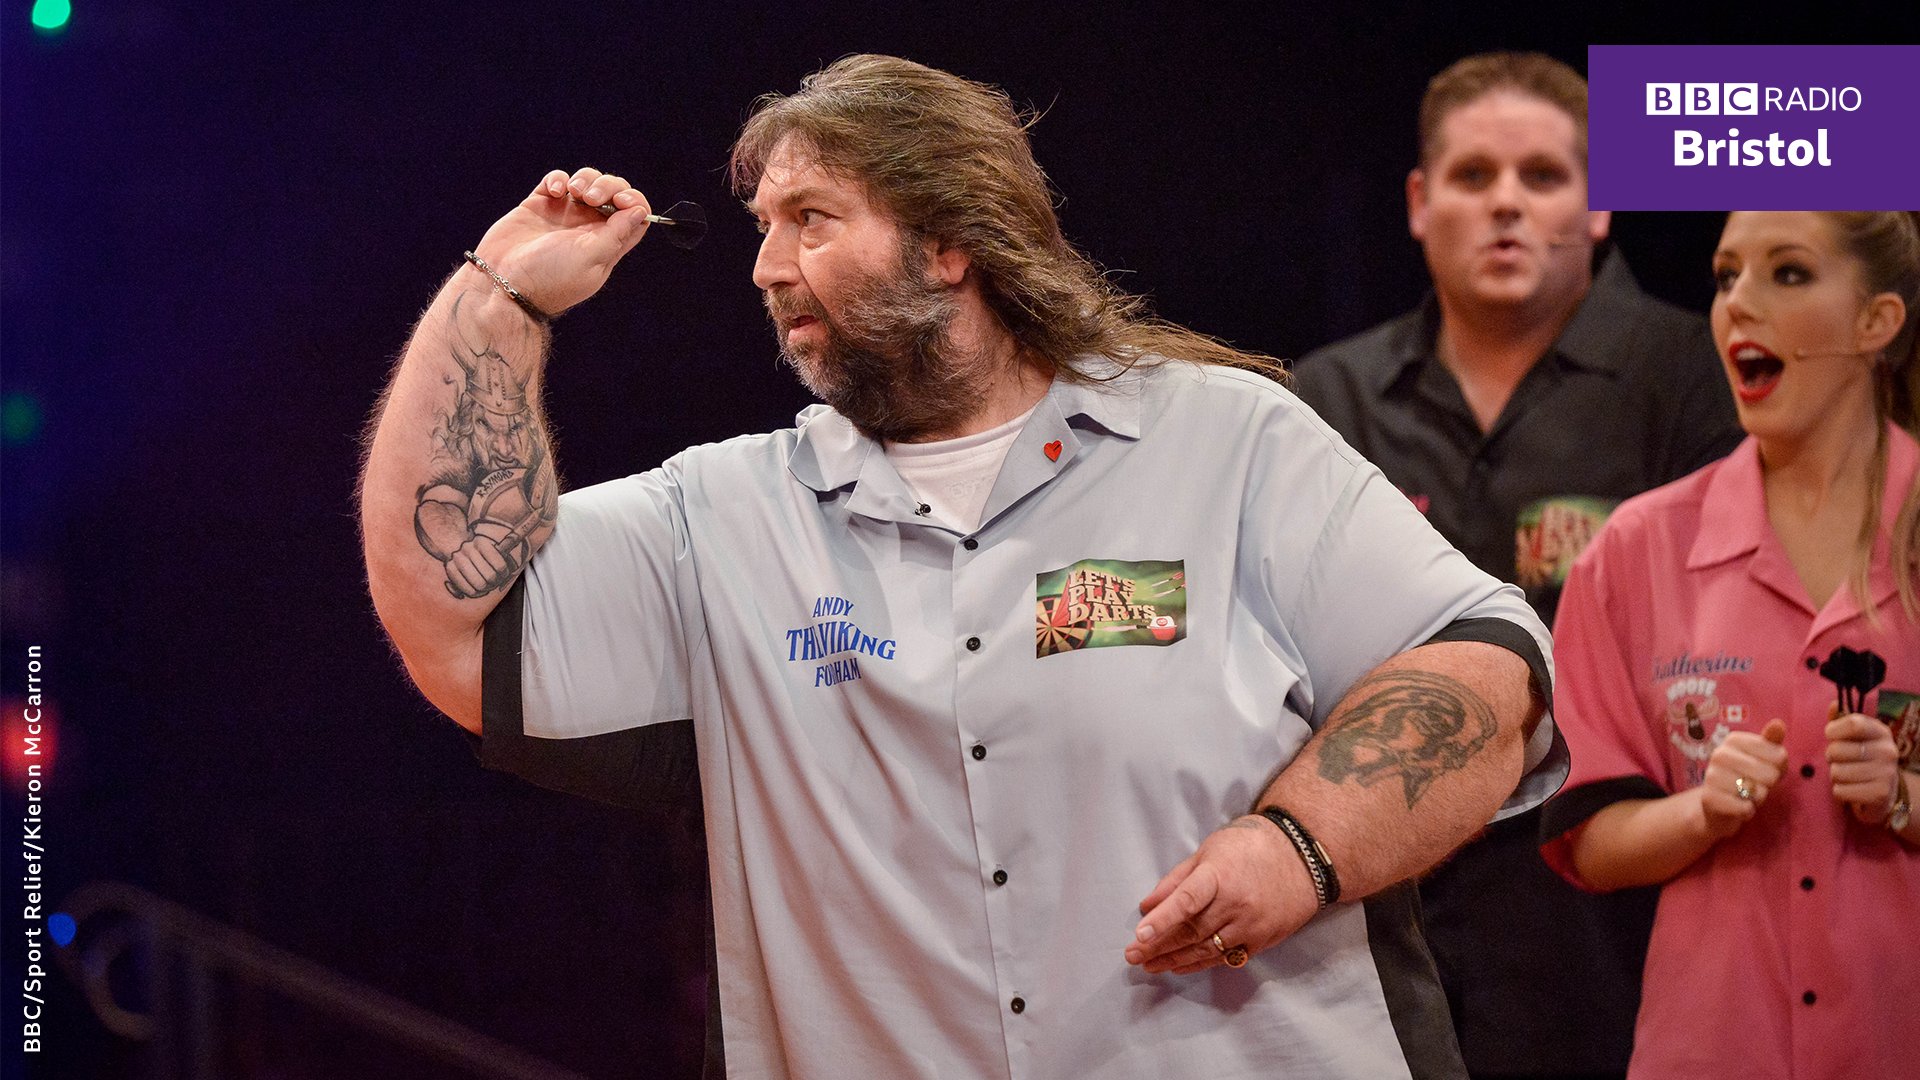 BBC Radio Bristol on Twitter: "'The Viking' died, aged 59. The former # darts world champion Andy Fordham was Bristol-born and an icon in the sport. https://t.co/KaelEkoCaE" / Twitter